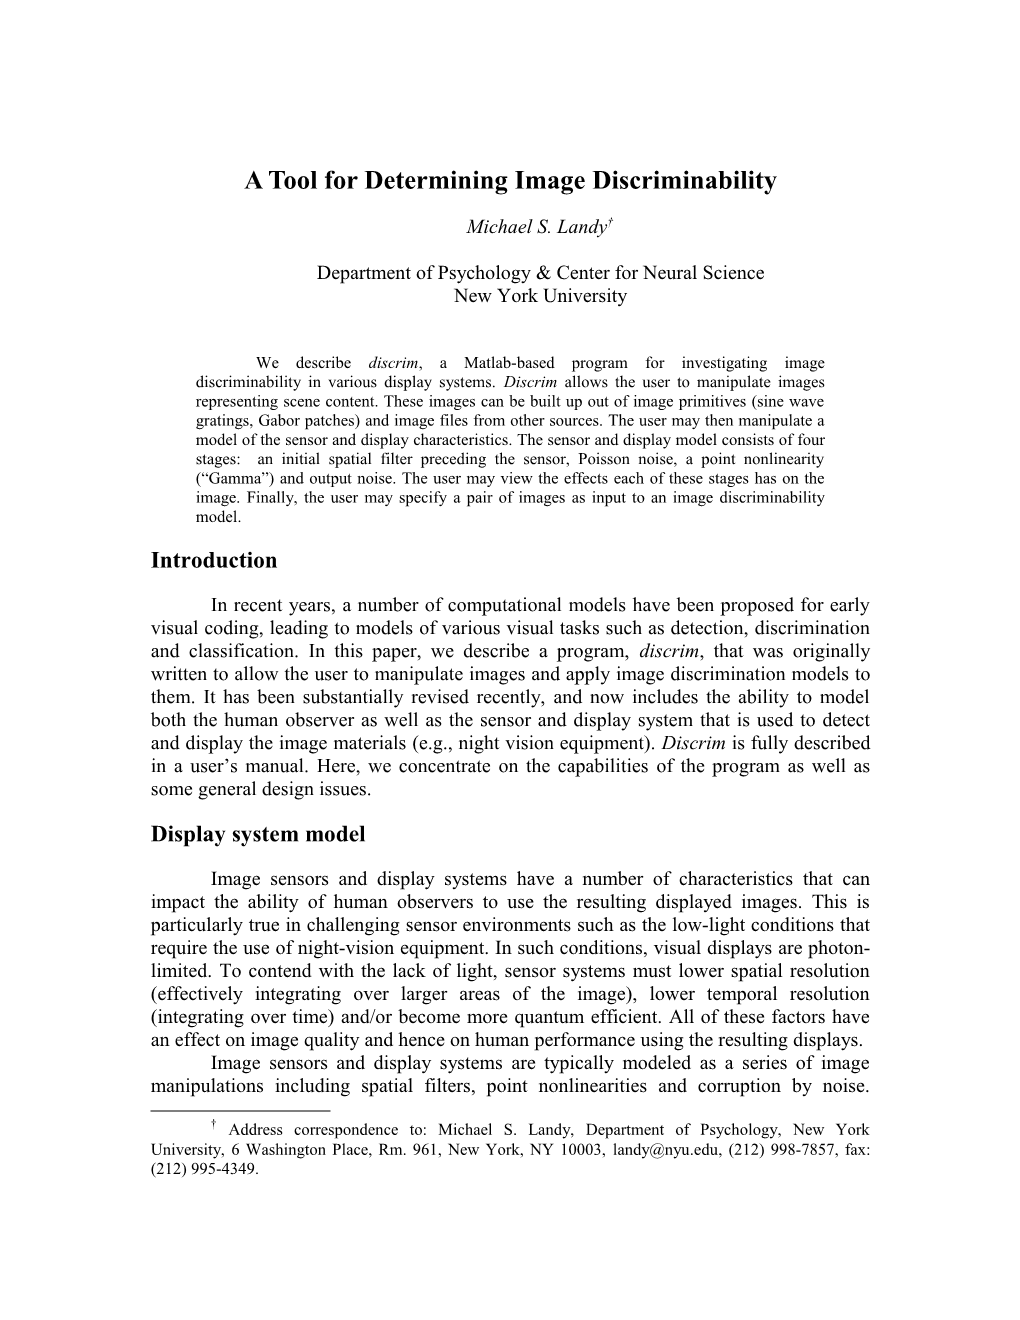 A Tool for Determining Image Discriminability